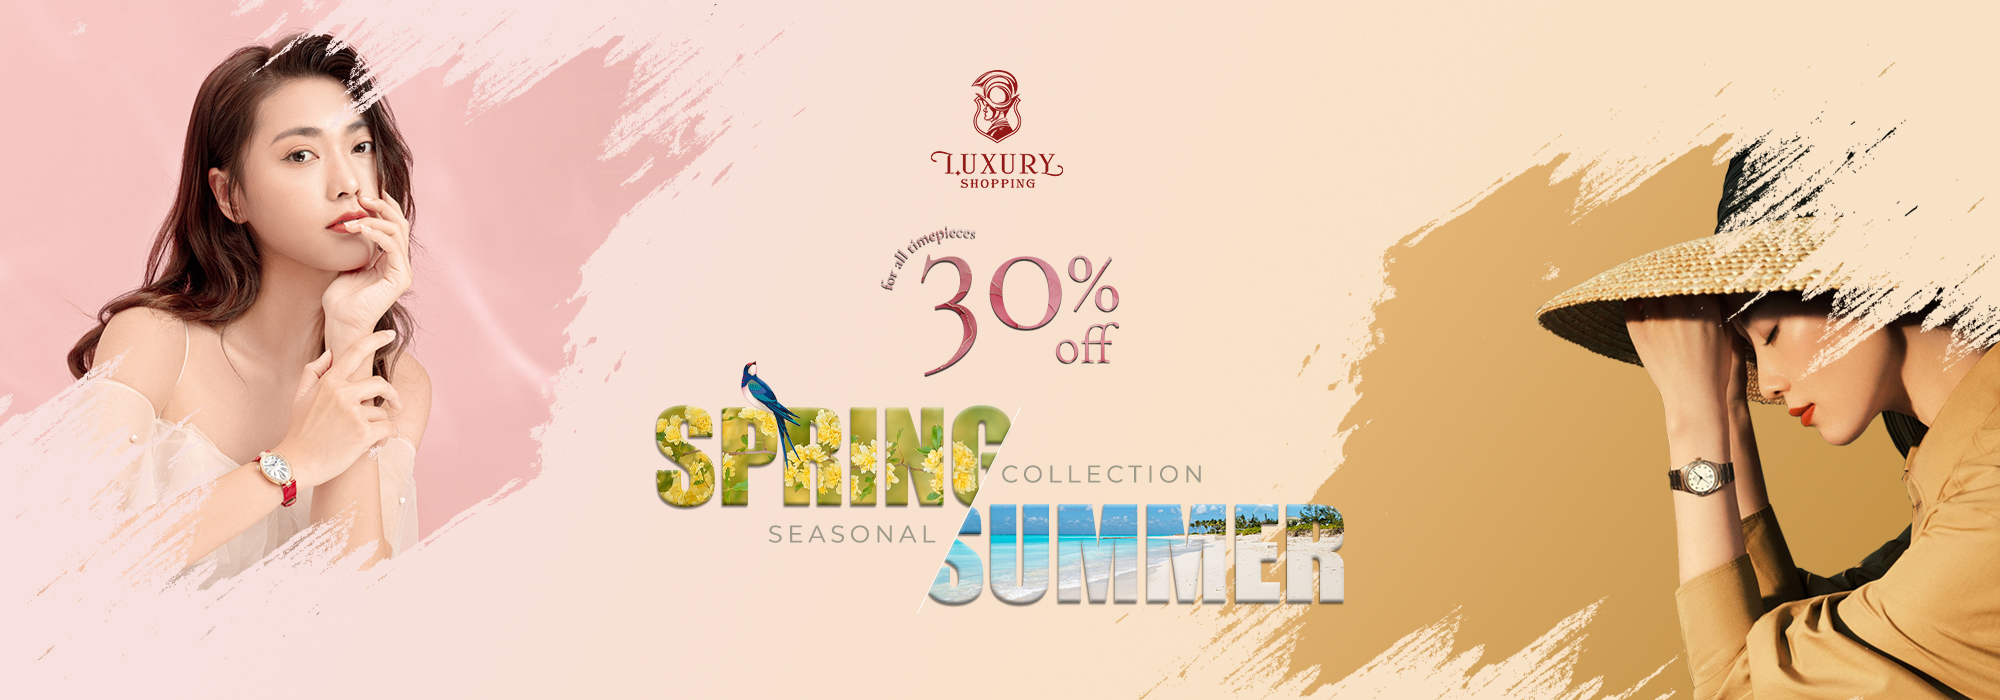 SPRING SUMMER WATCH COLLECTION 2022 - SALE OFF UP TO 30%